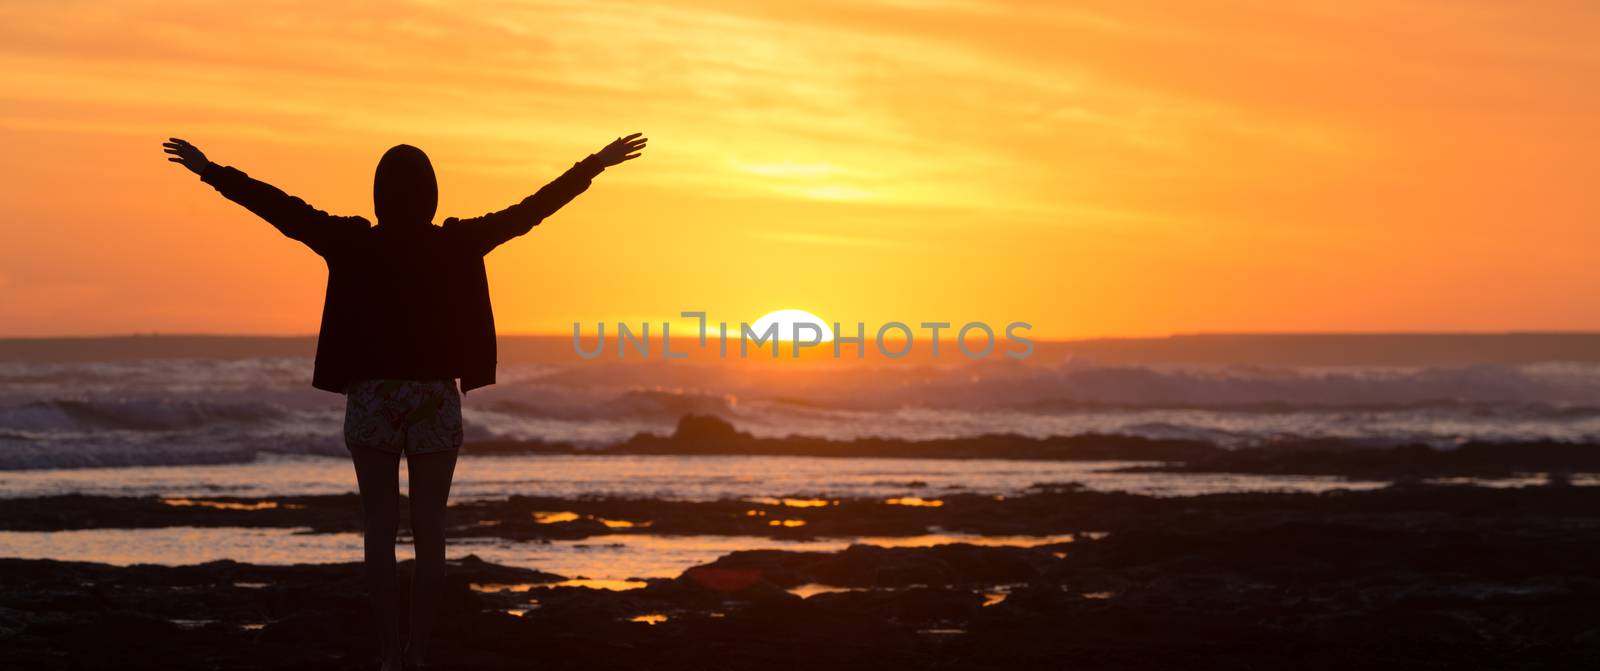 Silhouette of free woman enjoying freedom feeling happy at beach at sunset. Serene relaxing woman in pure happiness and elated enjoyment with arms raised outstretched up. 